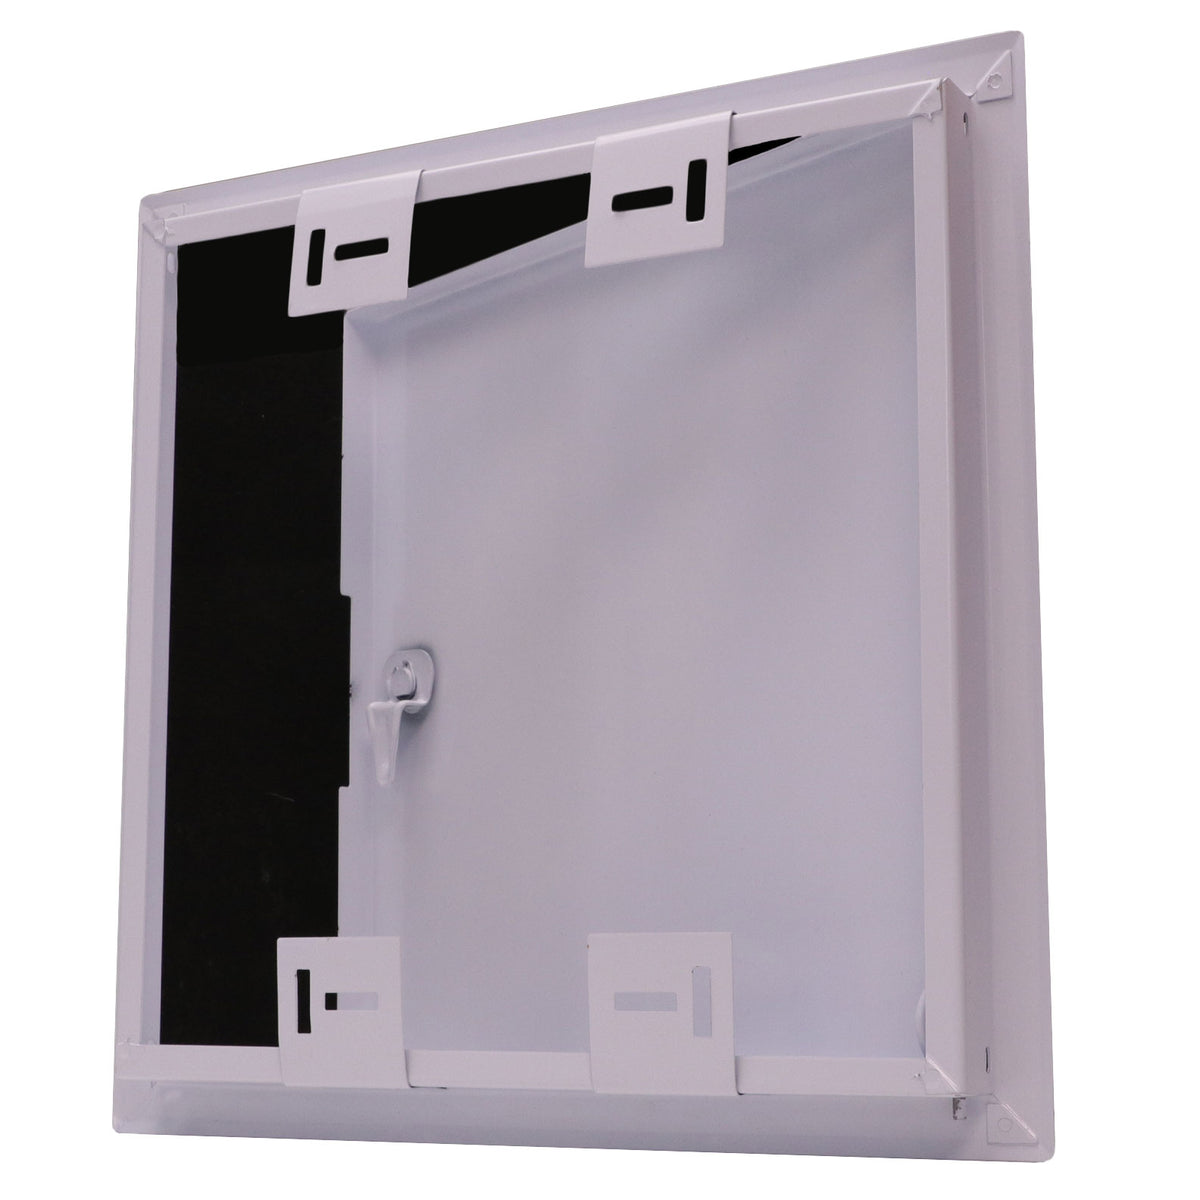 12&quot; X 12&quot; Steel Access Panel Removable Door For Concealed Wall / Ceiling Application With Slotted Lock - [Outer Dimensions: 13&quot; Width X 13&quot; Height]